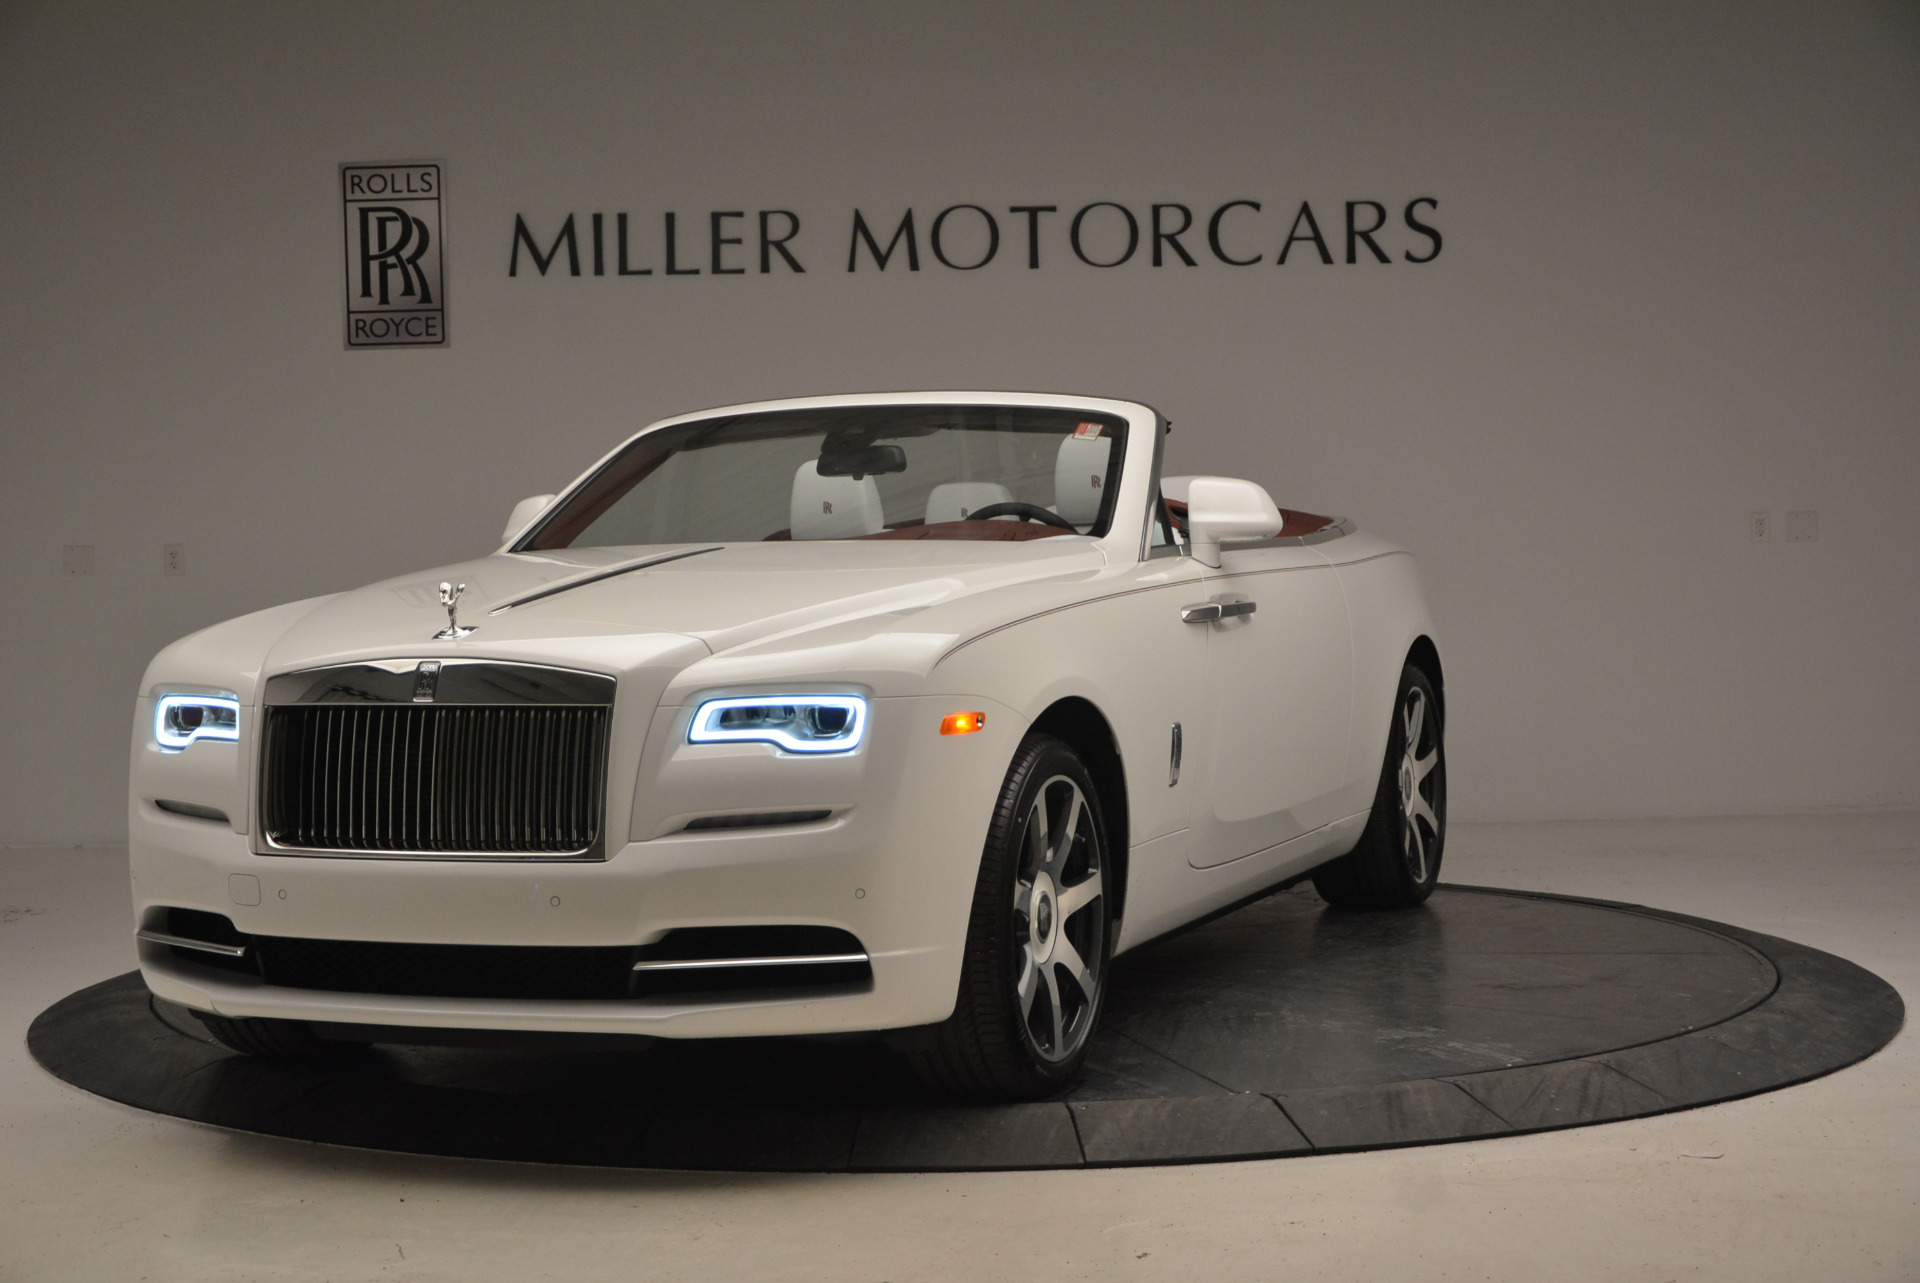 New 2017 Rolls-Royce Dawn for sale Sold at McLaren Greenwich in Greenwich CT 06830 1